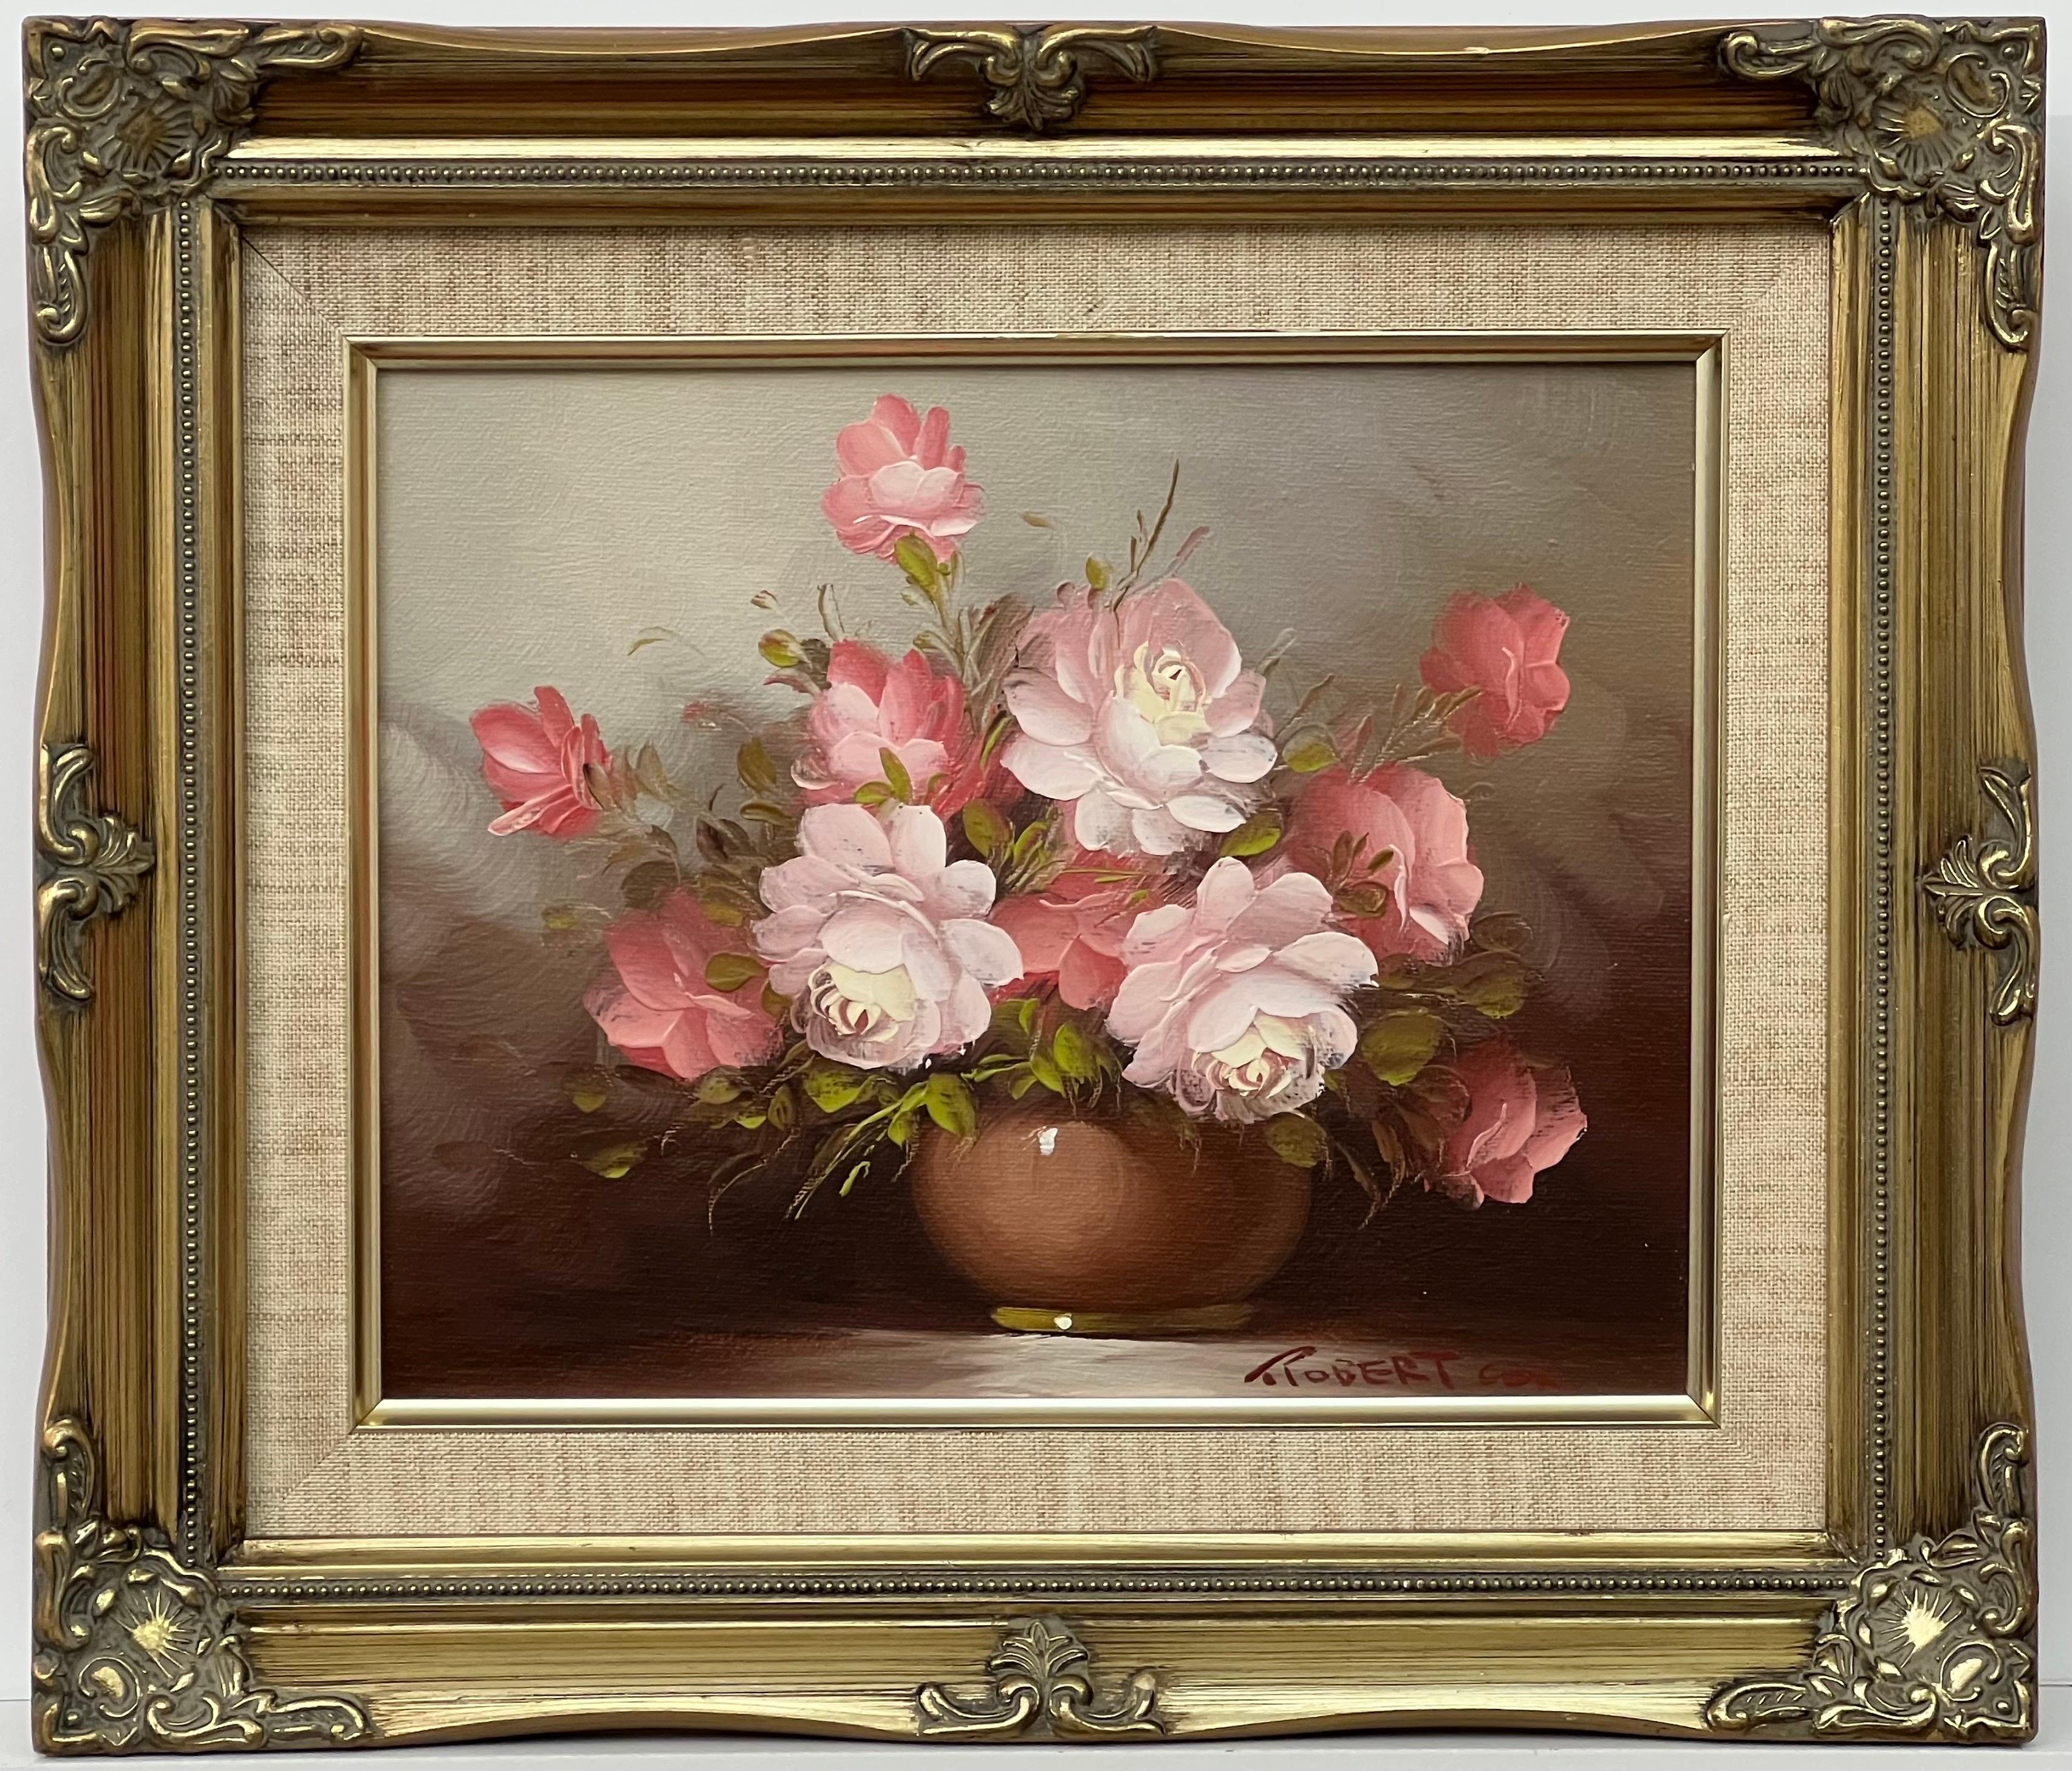 Still Life of a Vase of Pink Red & White Roses by 20th Century American Artist - American Impressionist Painting by Robert Cox